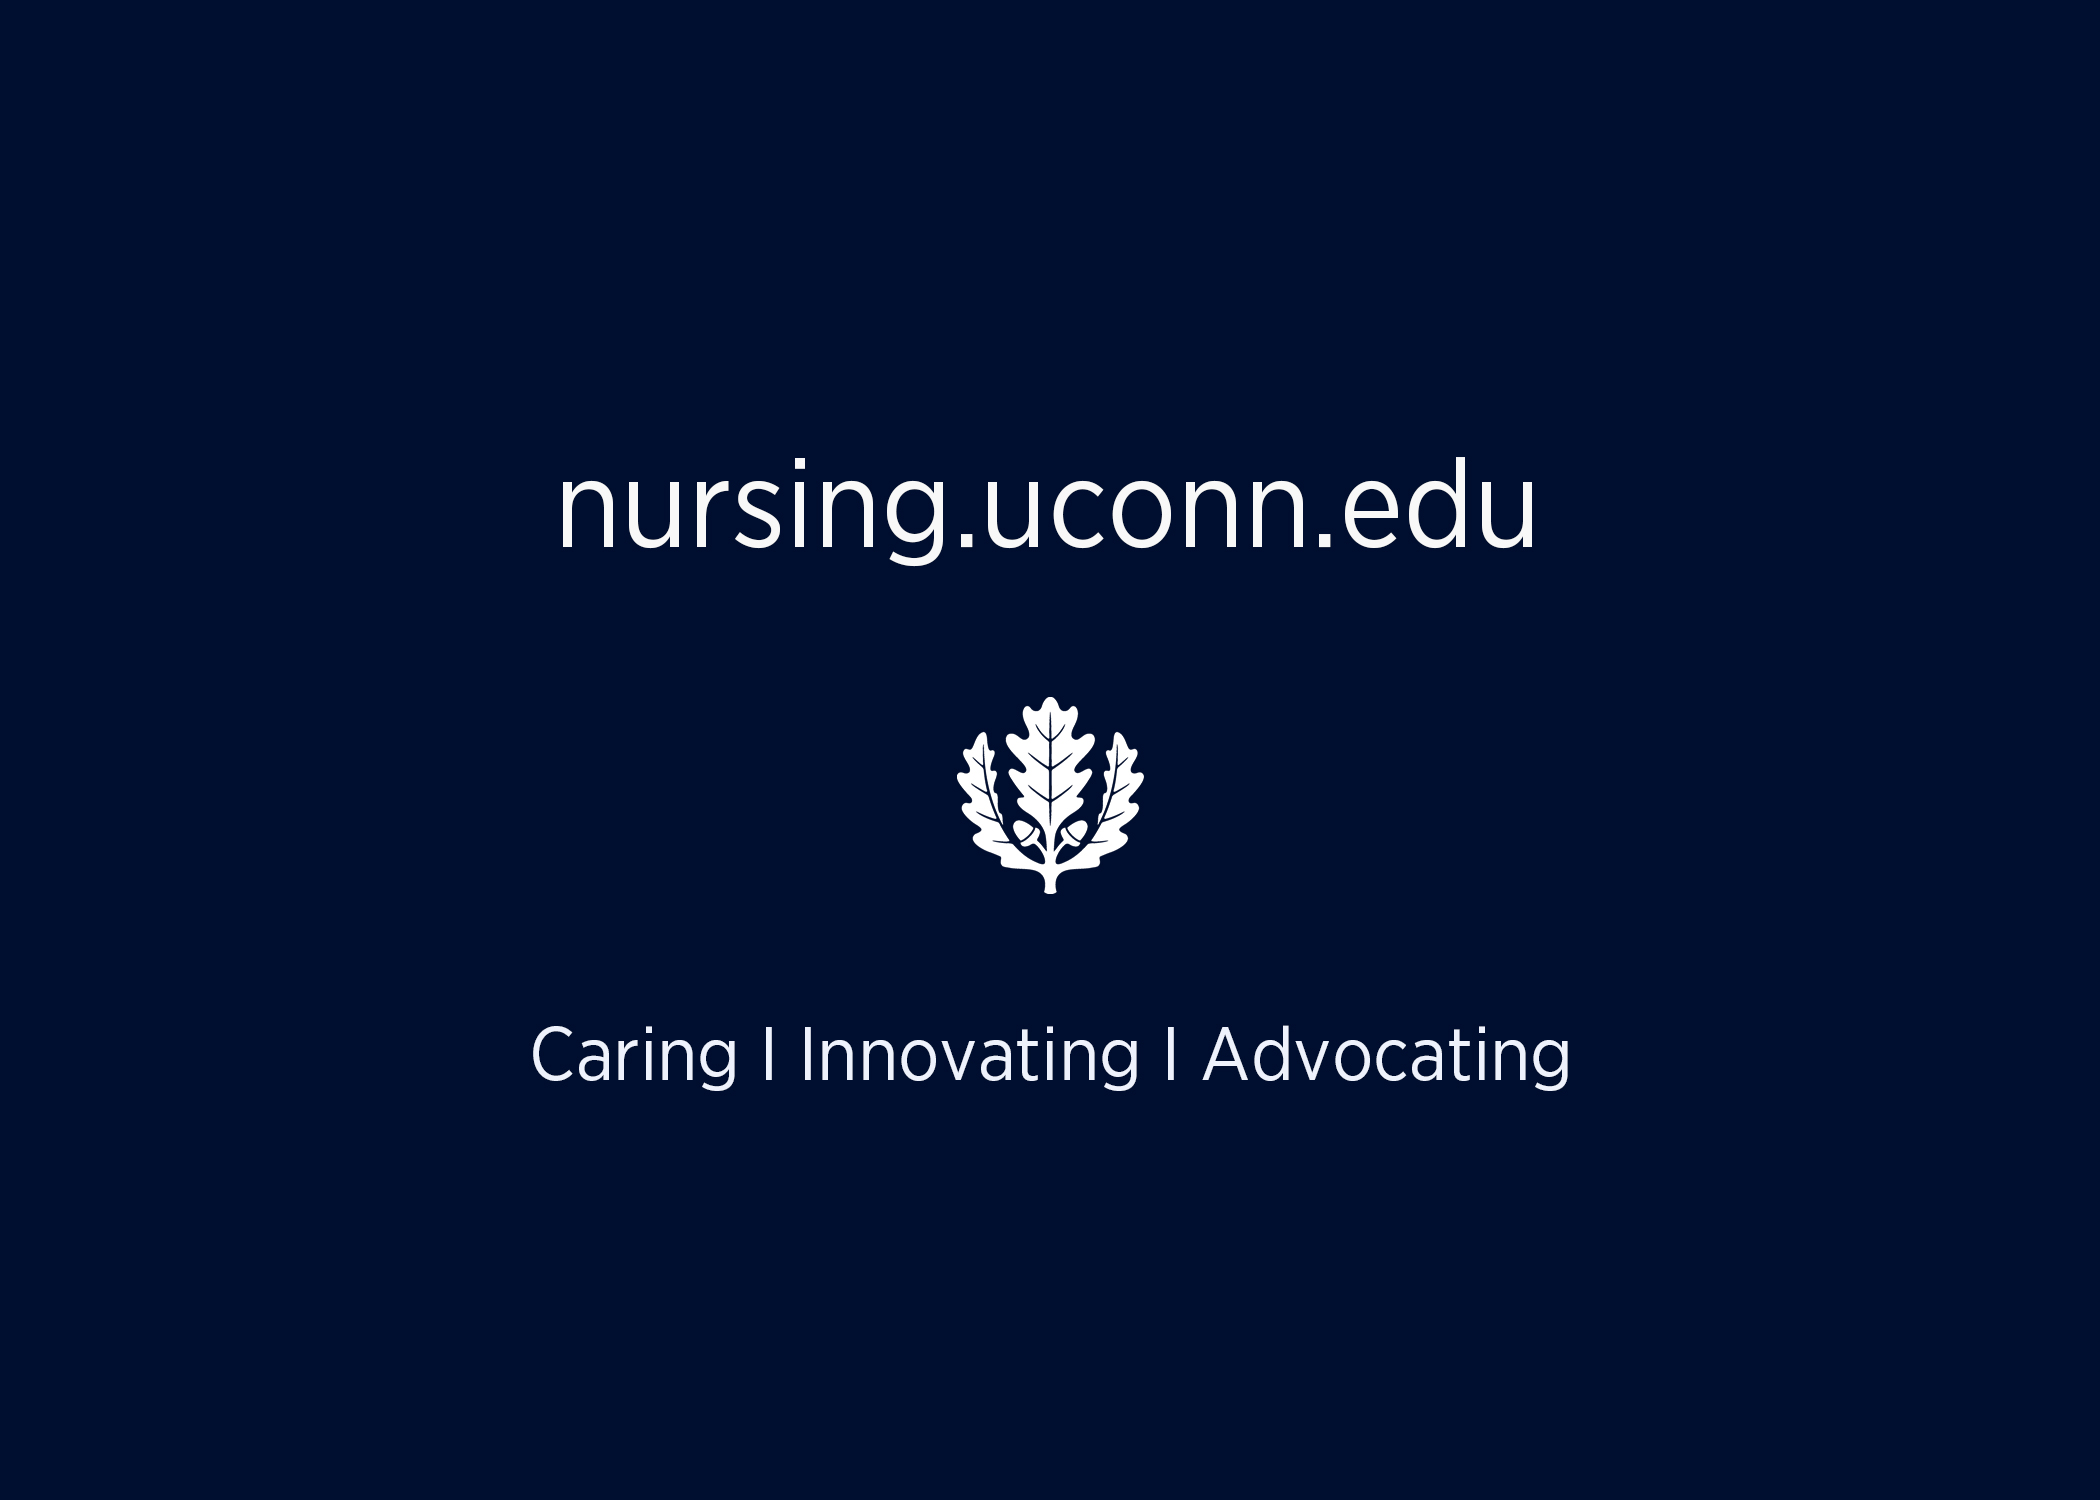 Navy blue graphic that reads, nursing.uconn.edu and "caring, innovating, advocating" in white text and features the UConn oak leaf insignia, also in white